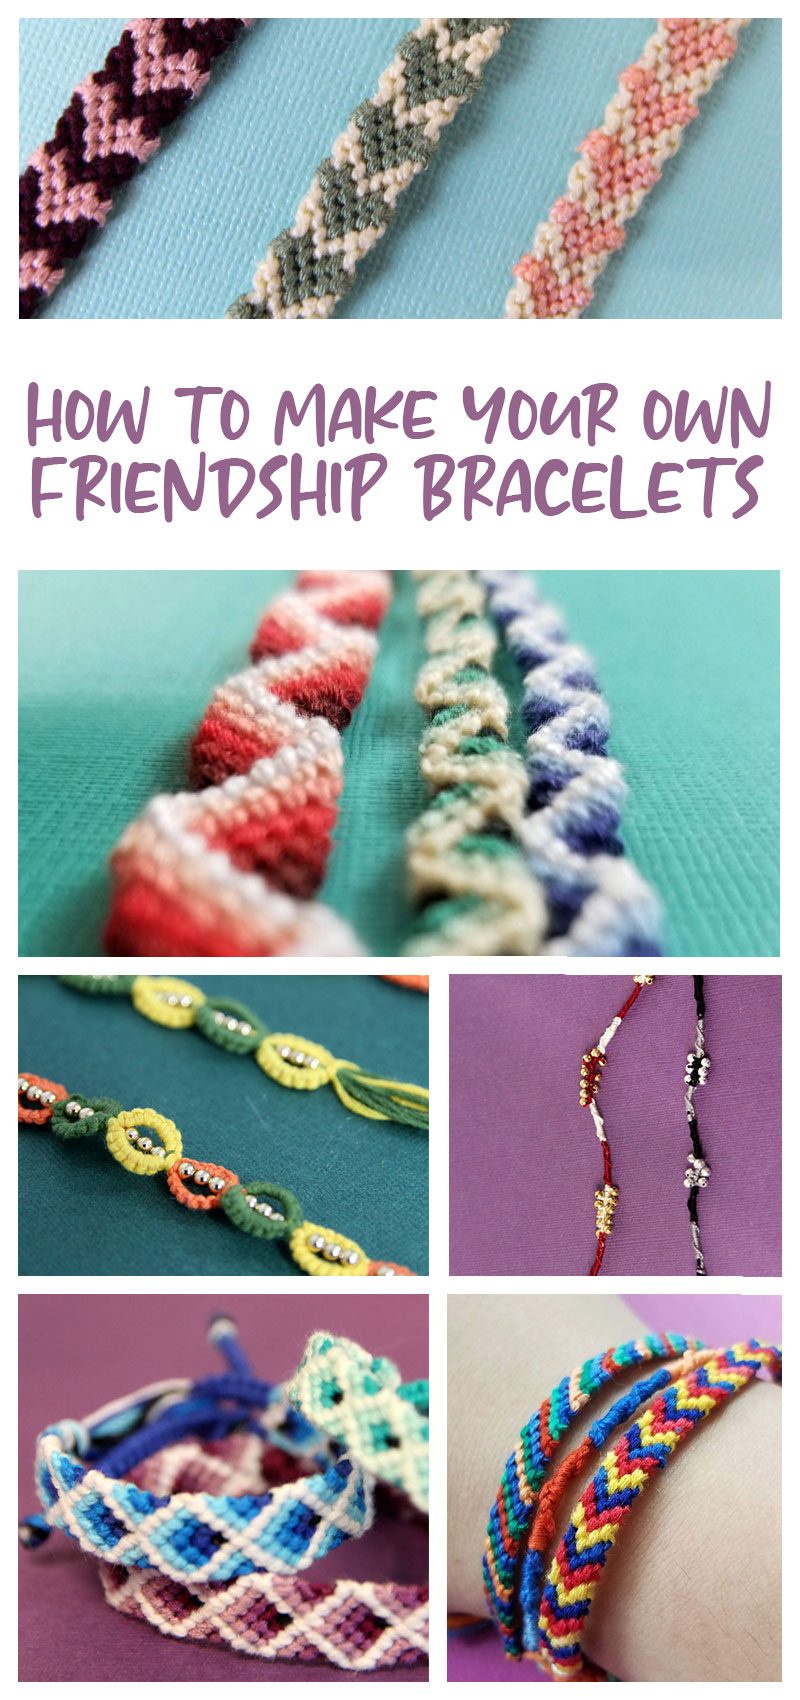 How to Make Bracelets with Yarn | Braided Friendship Bracelets | Yarn  bracelets, Yarn friendship bracelets, Braided friendship bracelets